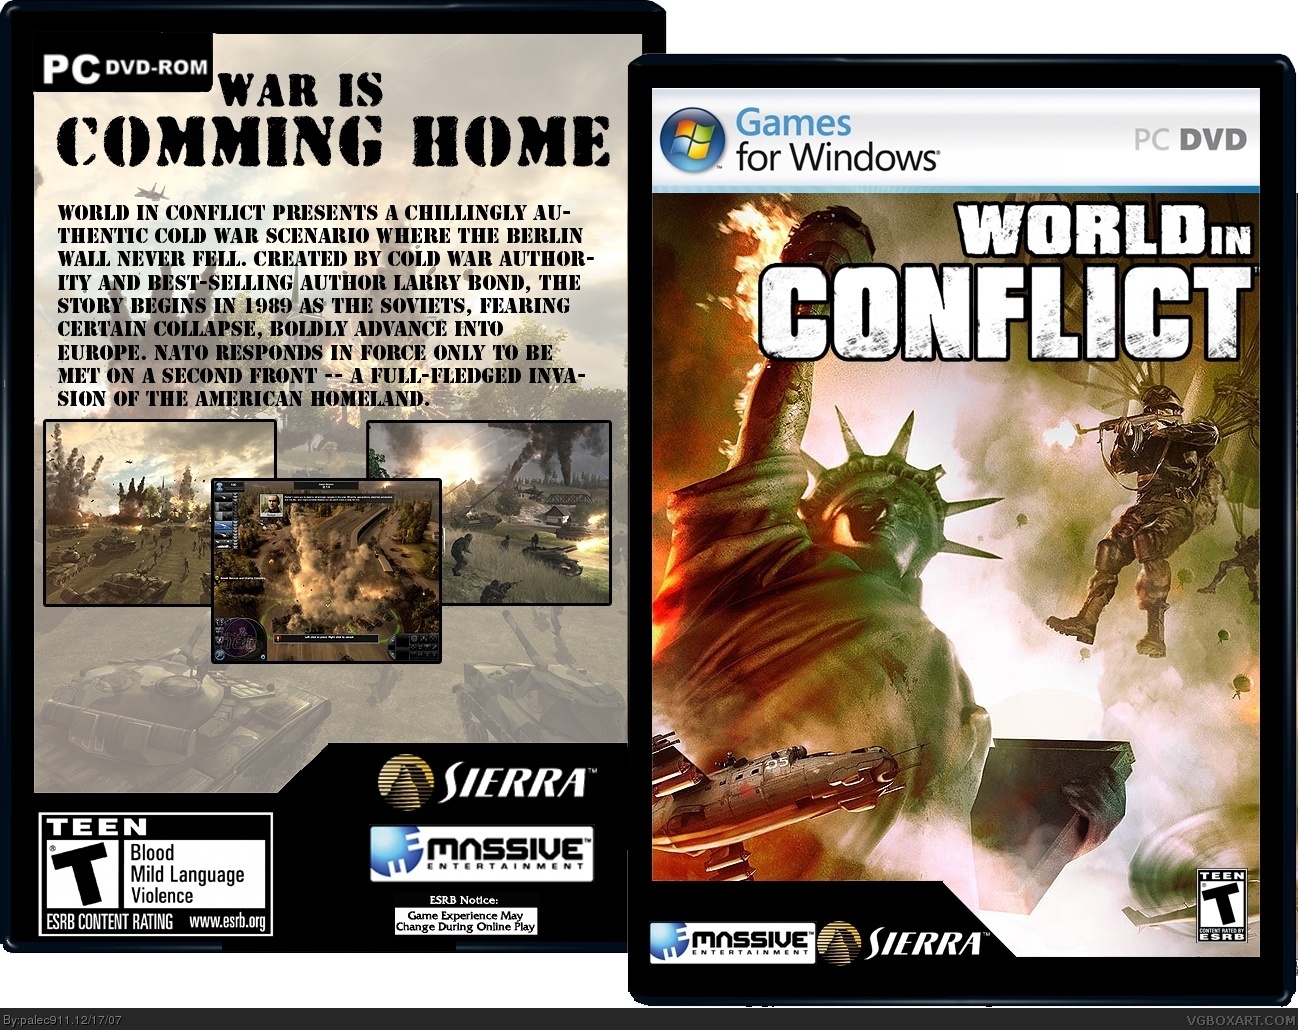 World in Conflict box cover